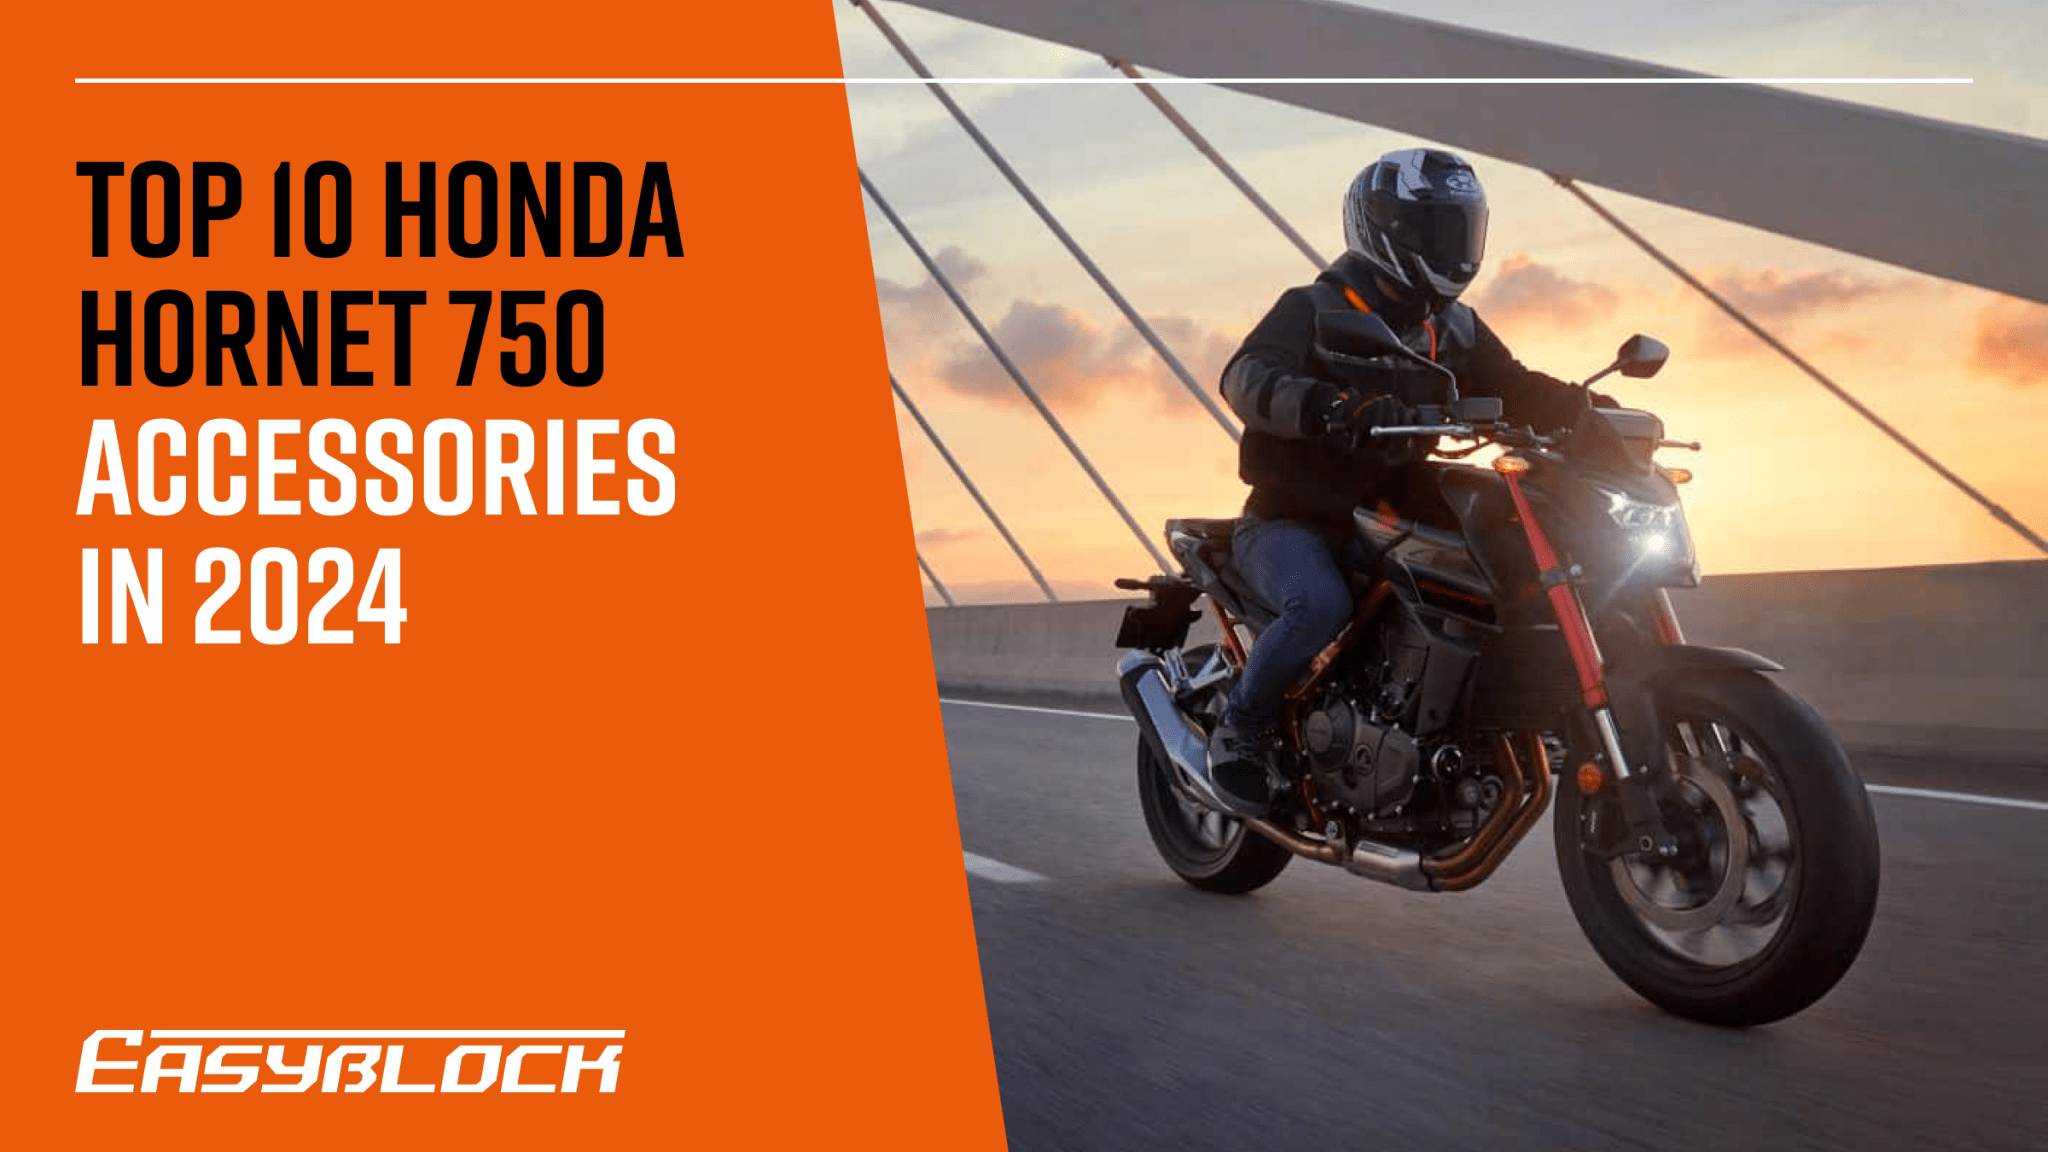 Top 10 Honda Hornet 750 Accessories (Updated for 2024)